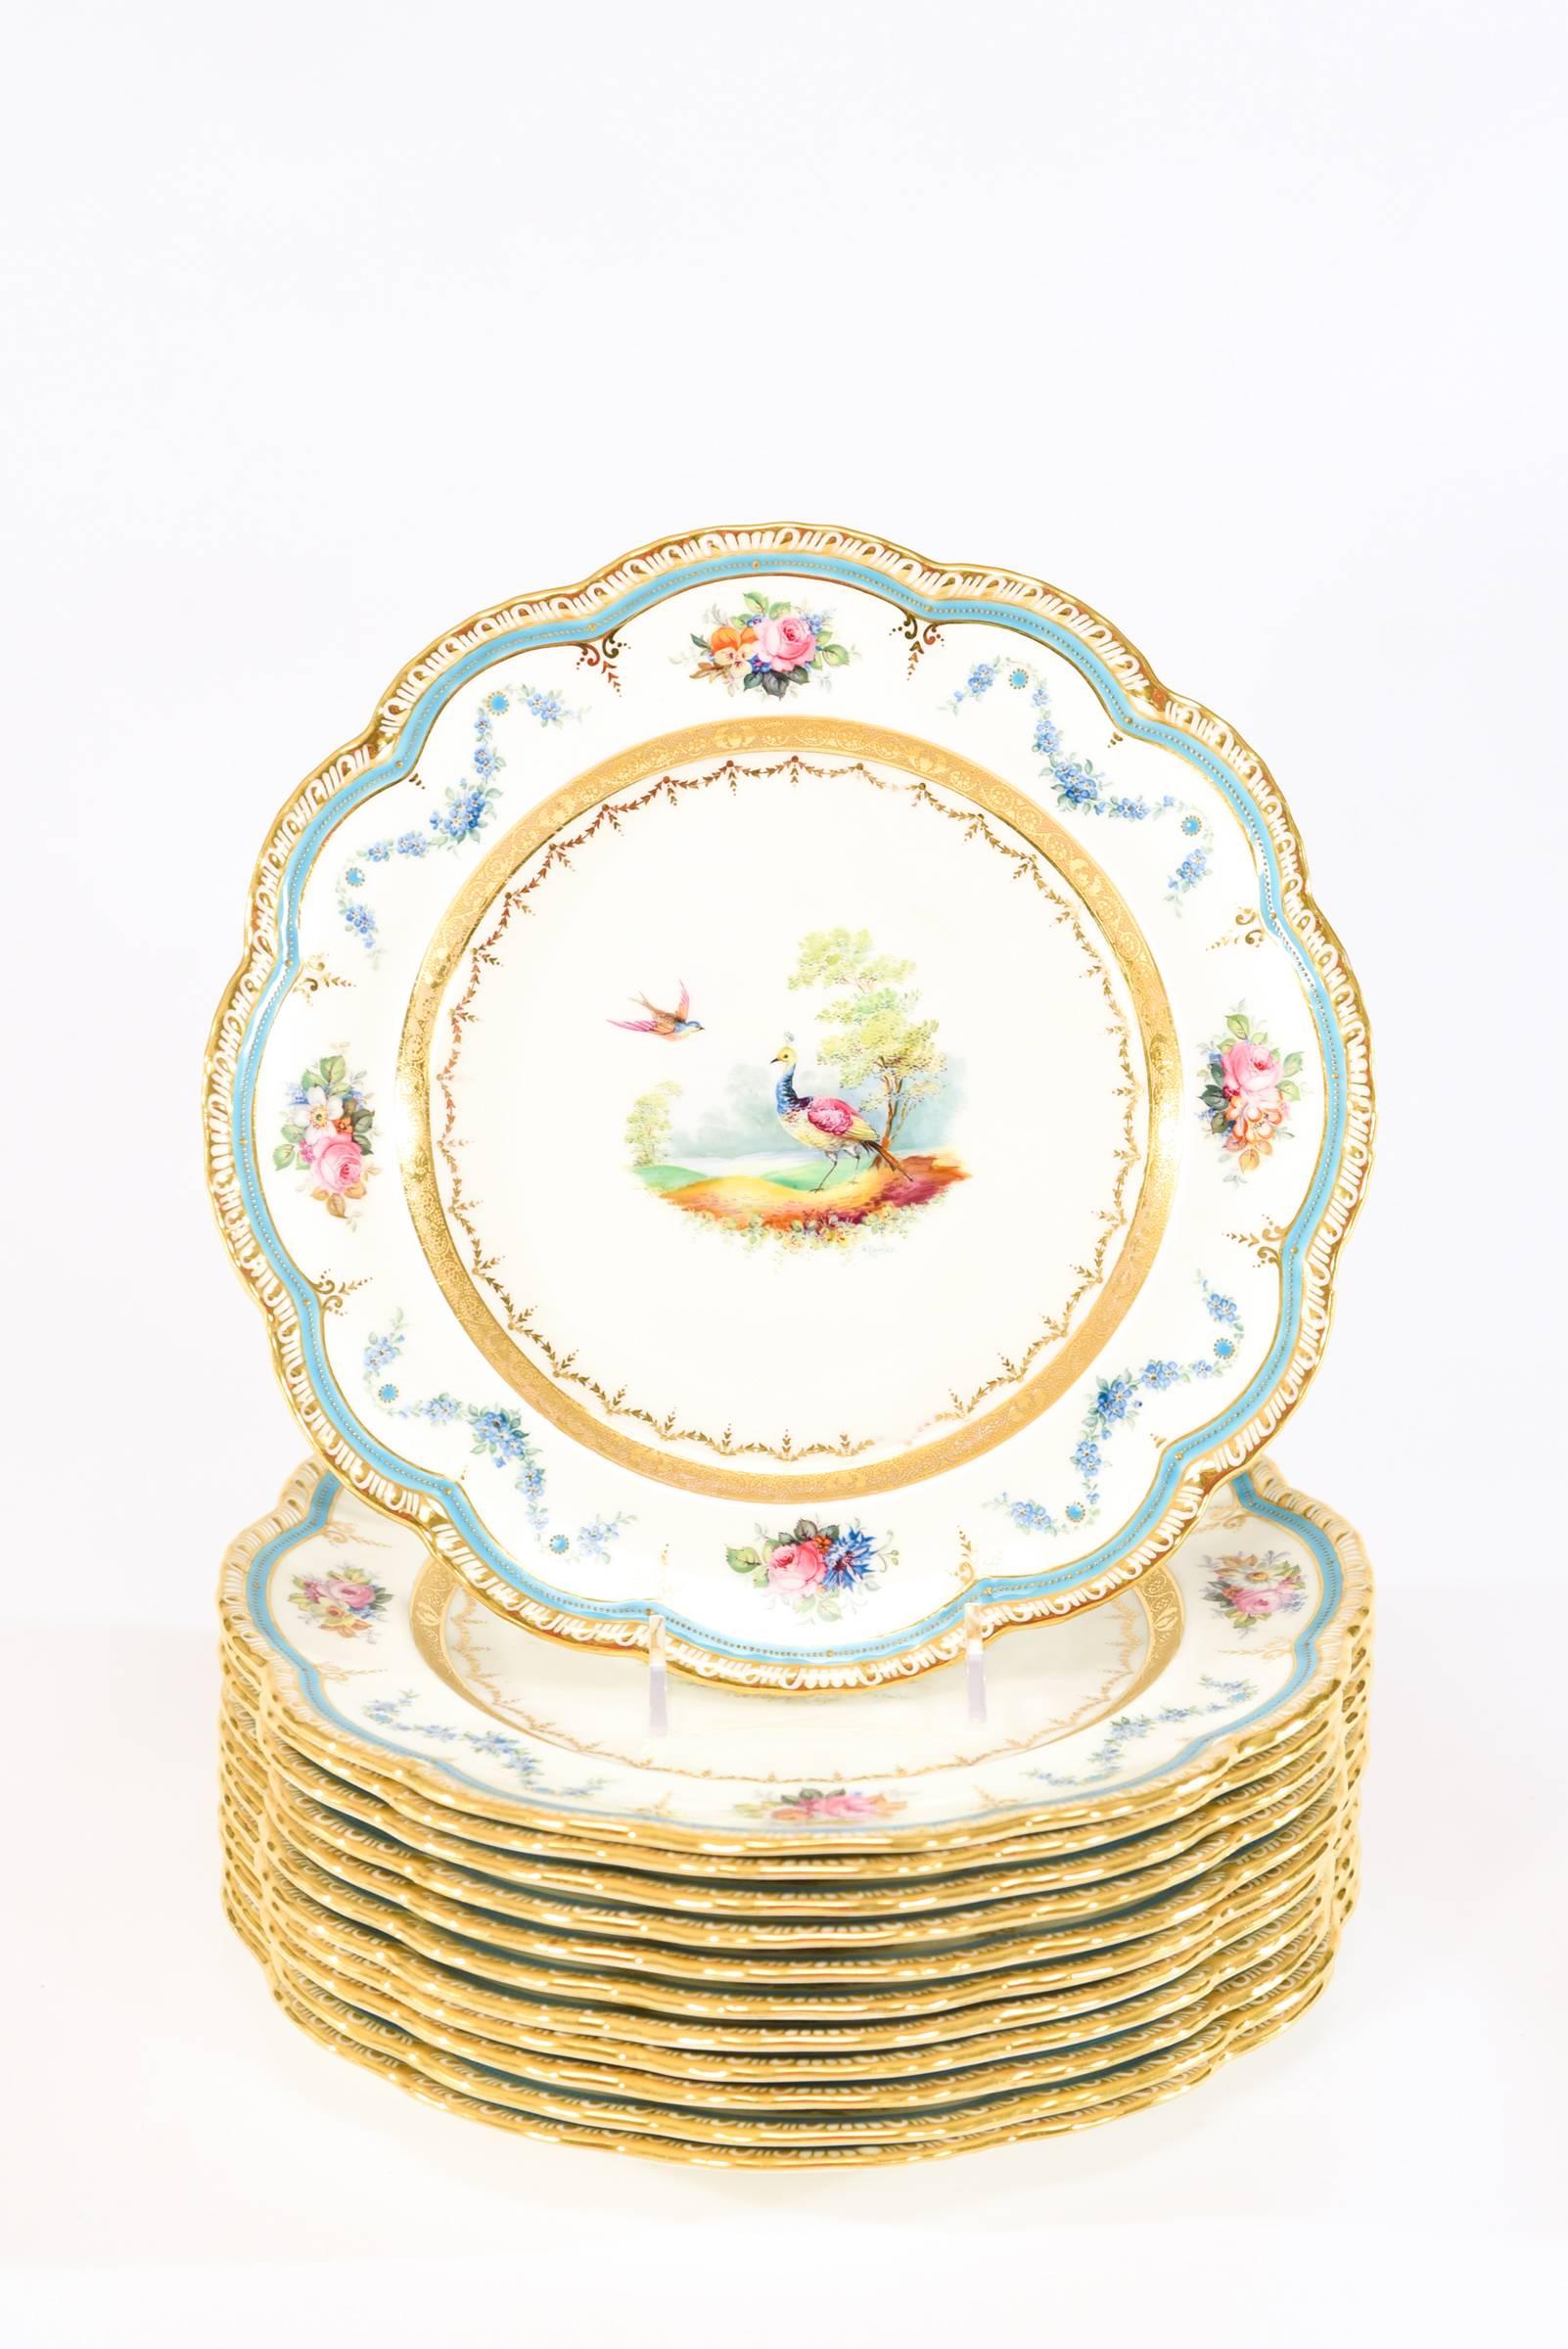 Turquoise is in! This set of 12 hand painted and artist signed dessert plates are presented with a piecrust border, trimmed in gold and highlighted with a band of turquoise enamel. The centers are uniquely painted, featuring various exotic birds.